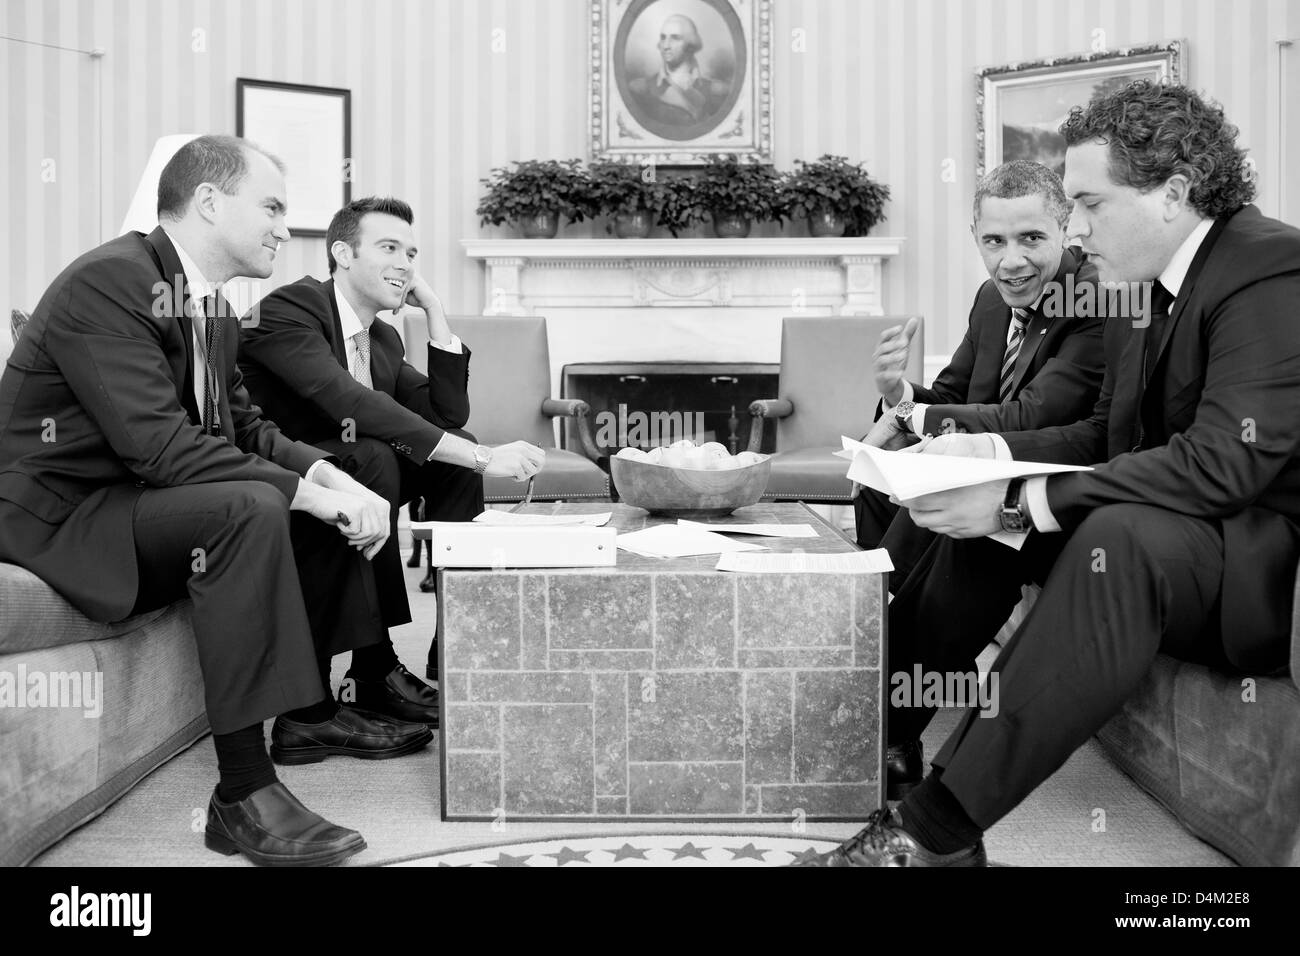 US President Barack Obama works on his State of the Union address with staff in the Oval Office February 12, 2013 in Washington, DC. Seated, from left, are: Ben Rhodes, Deputy National Security Advisor for Strategic Communications; Director of Speechwriting Jon Favreau; and Cody Keenan, Deputy Director of Speechwriting. Stock Photo